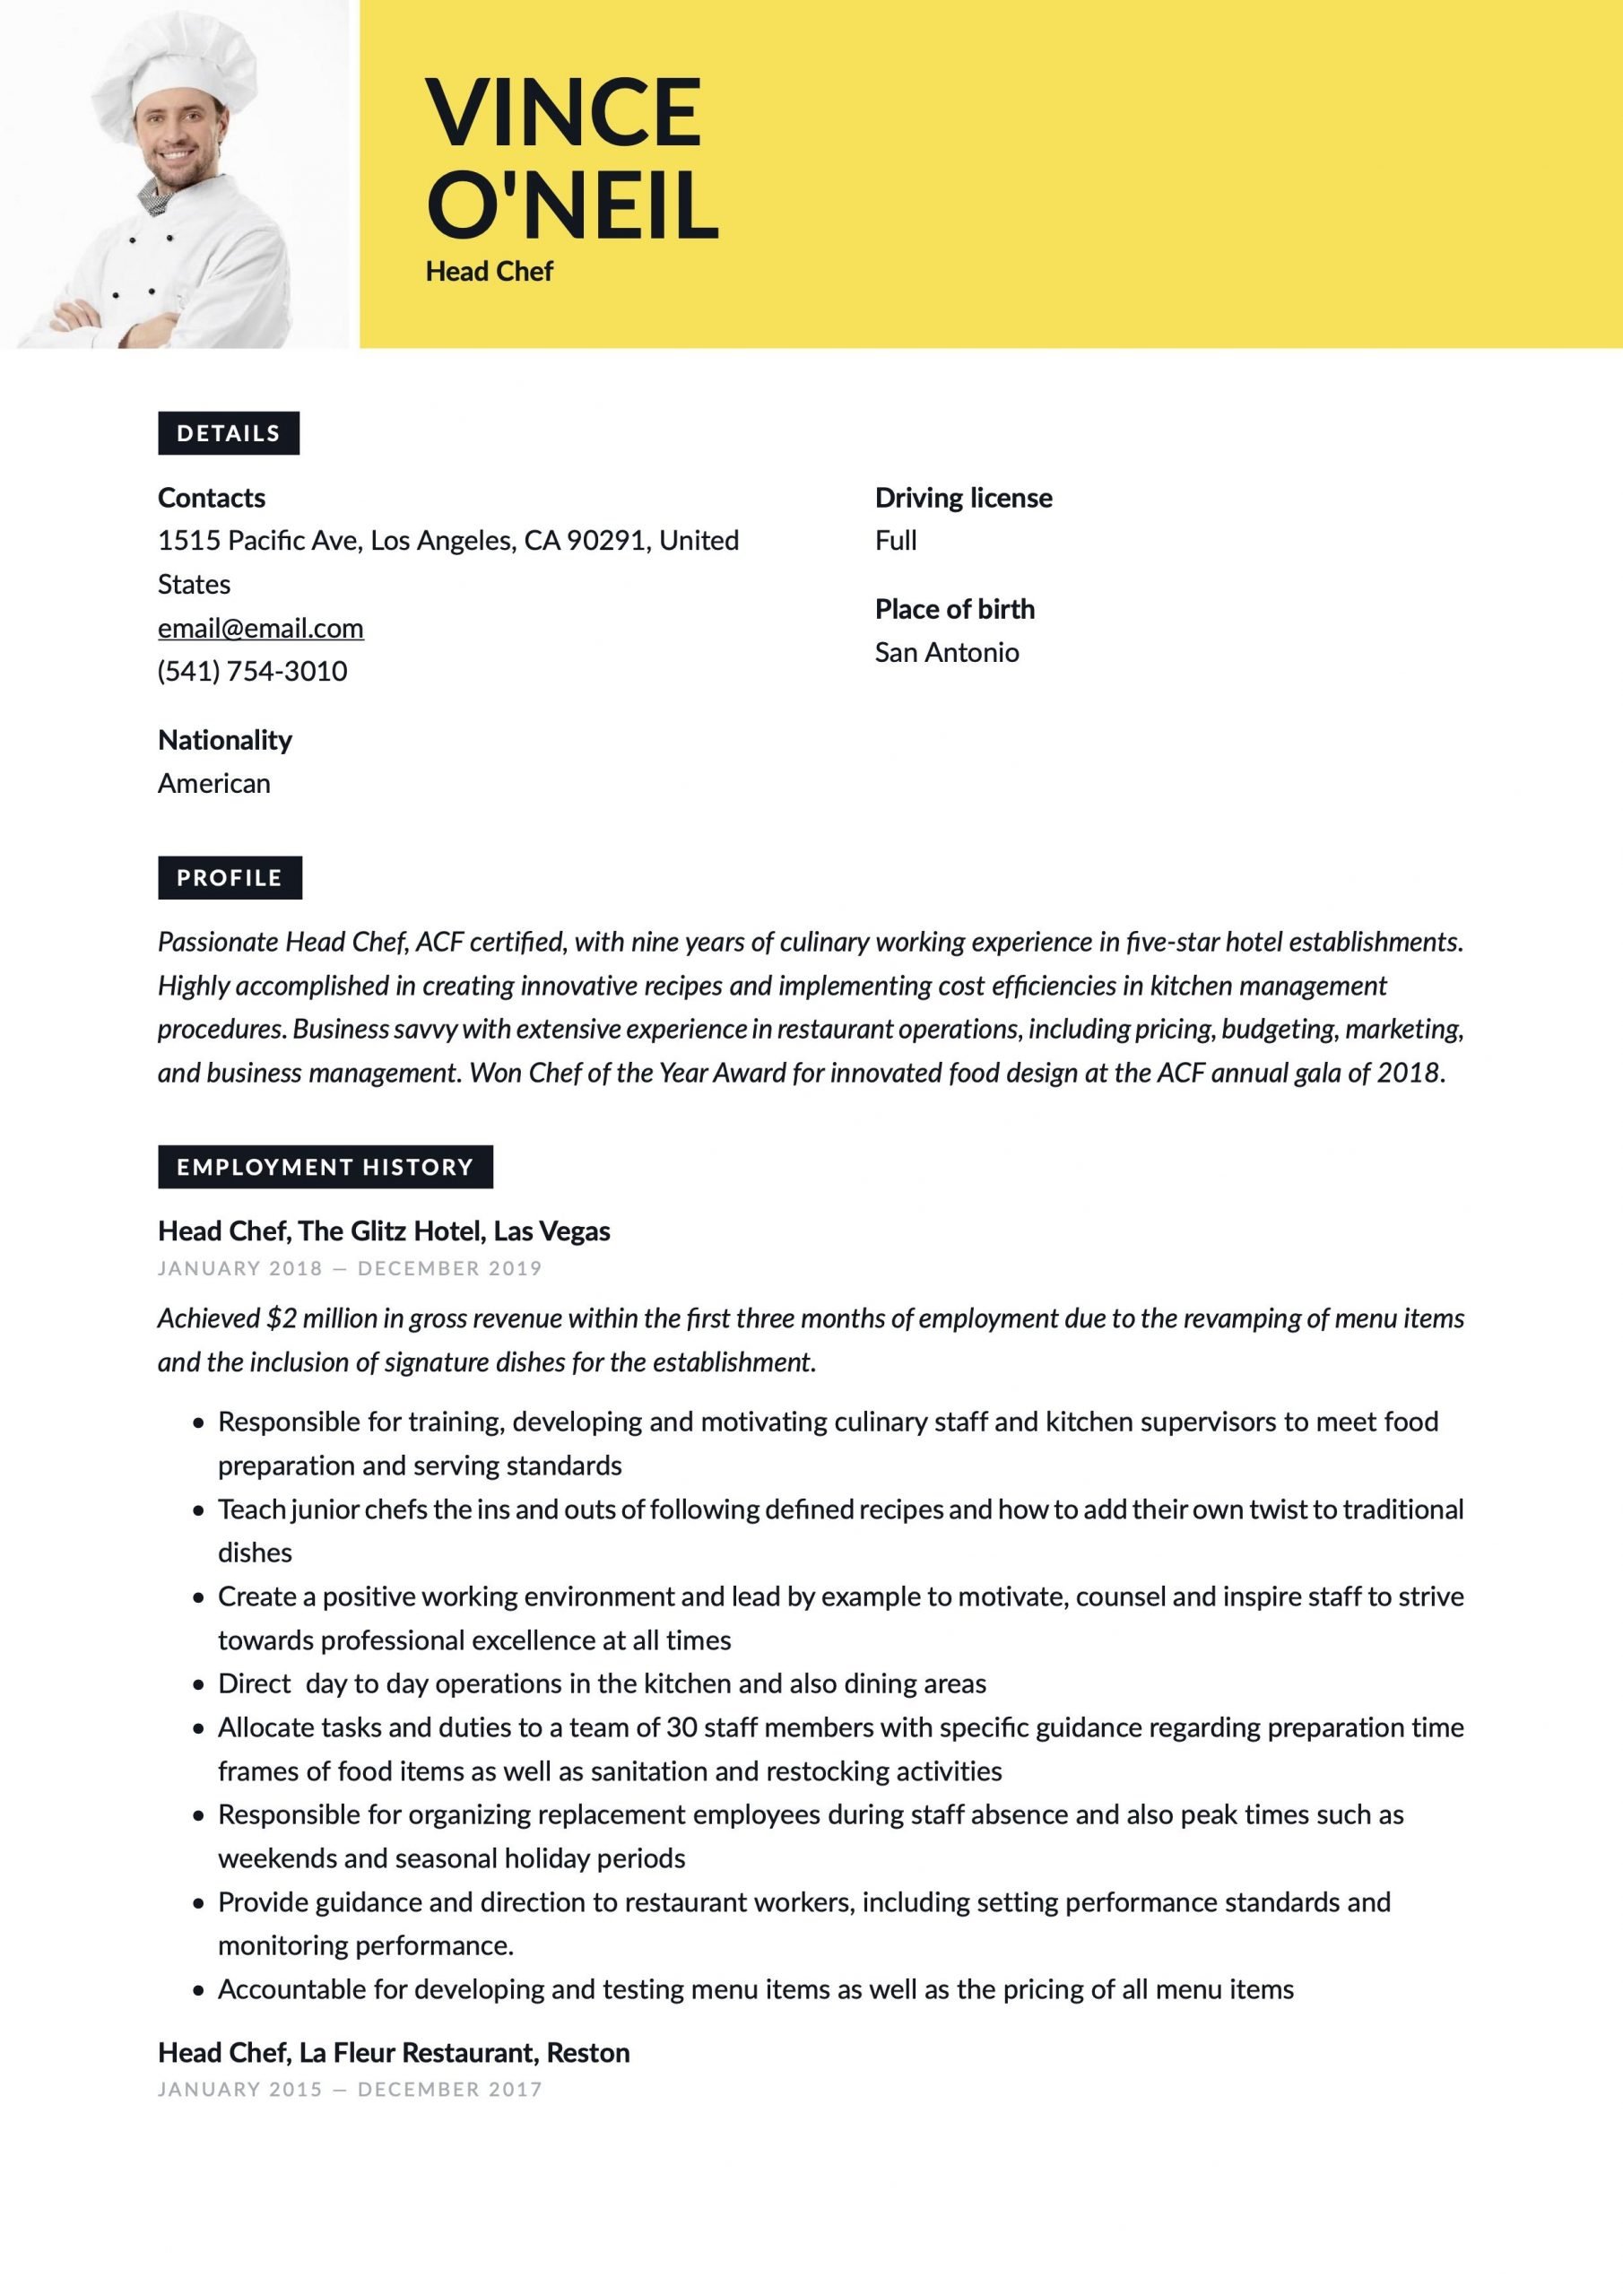 Head Chef Resume Template in 2020